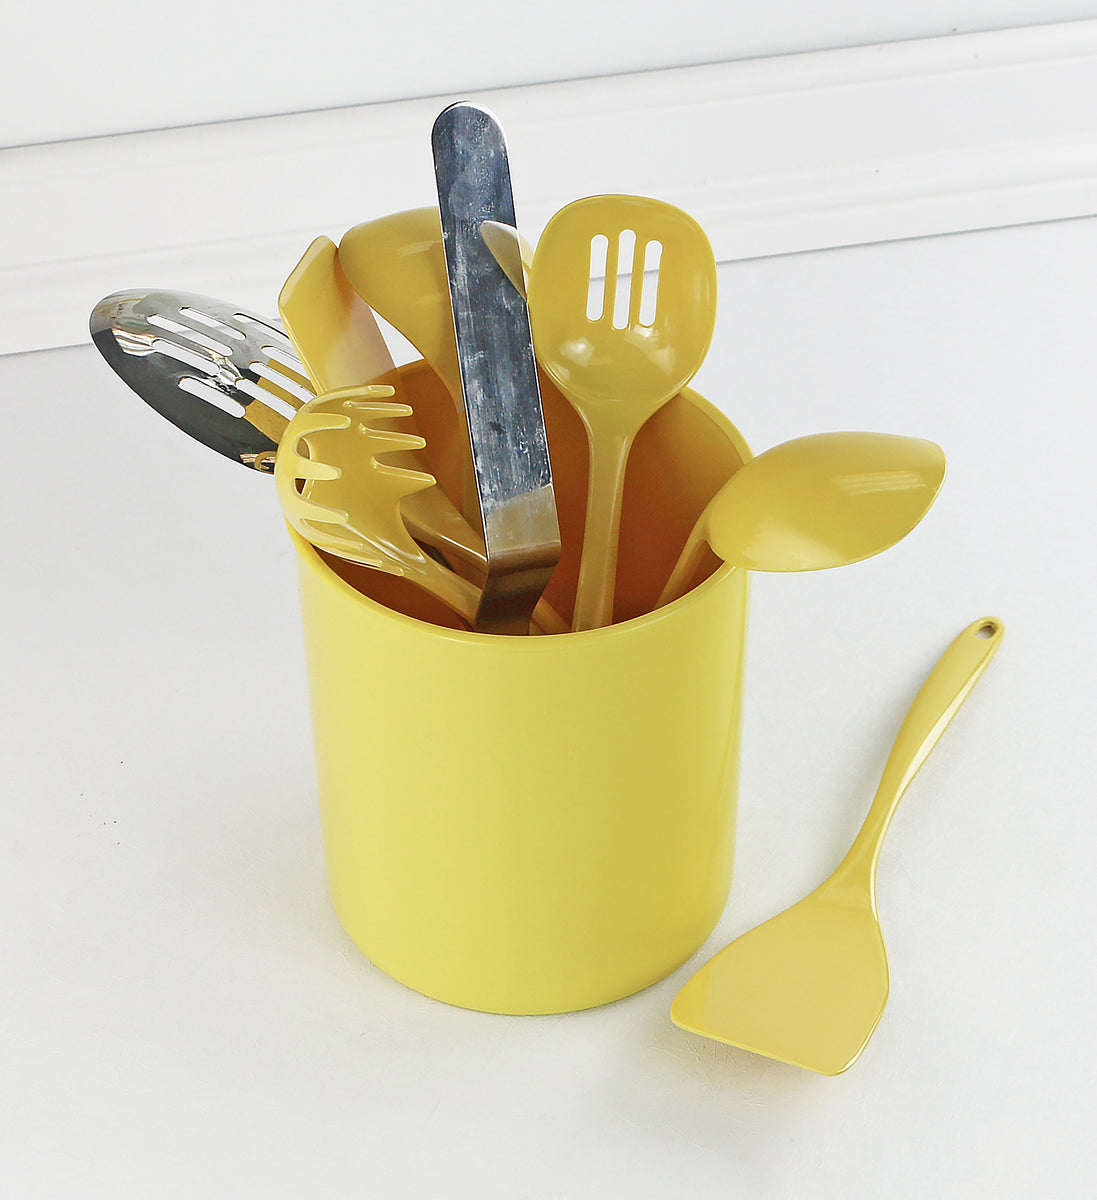 Reston Lloyd Multipurpose Utensil/Crock Holders Organize Wide Variety of Sizes of Utensils & Tools, Includes Extra Large, Large, & Miniature, White